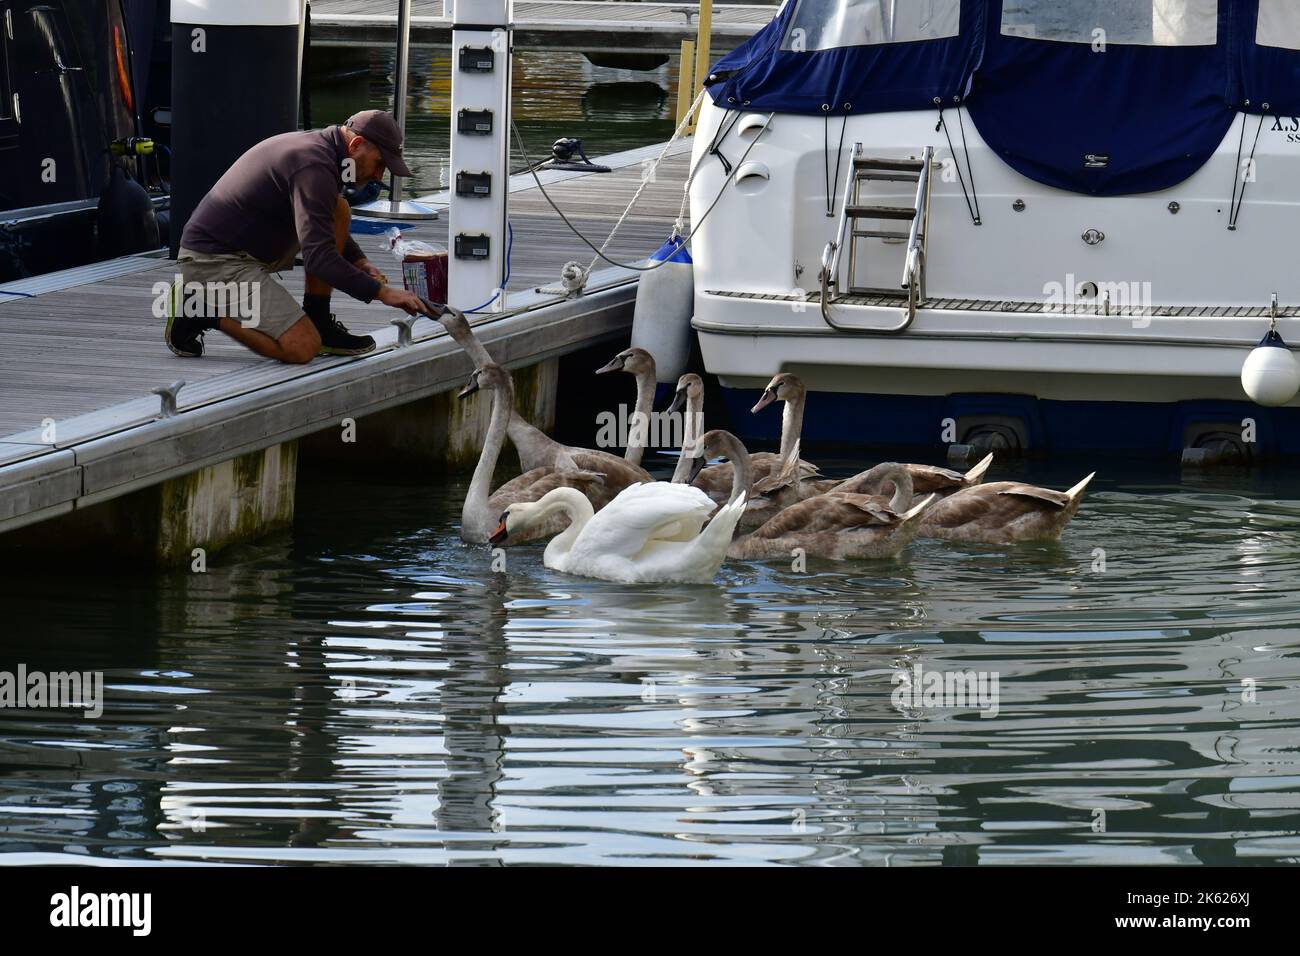 Portishead, UK. 11th Oct, 2022. Portishead, Bristol, 11/10/2022, On a warm afternoon in Portishead Marina, a man on boat walkway is seen feeding a family of swans. Picture Credit: Robert Timoney/Alamy Live News Stock Photo